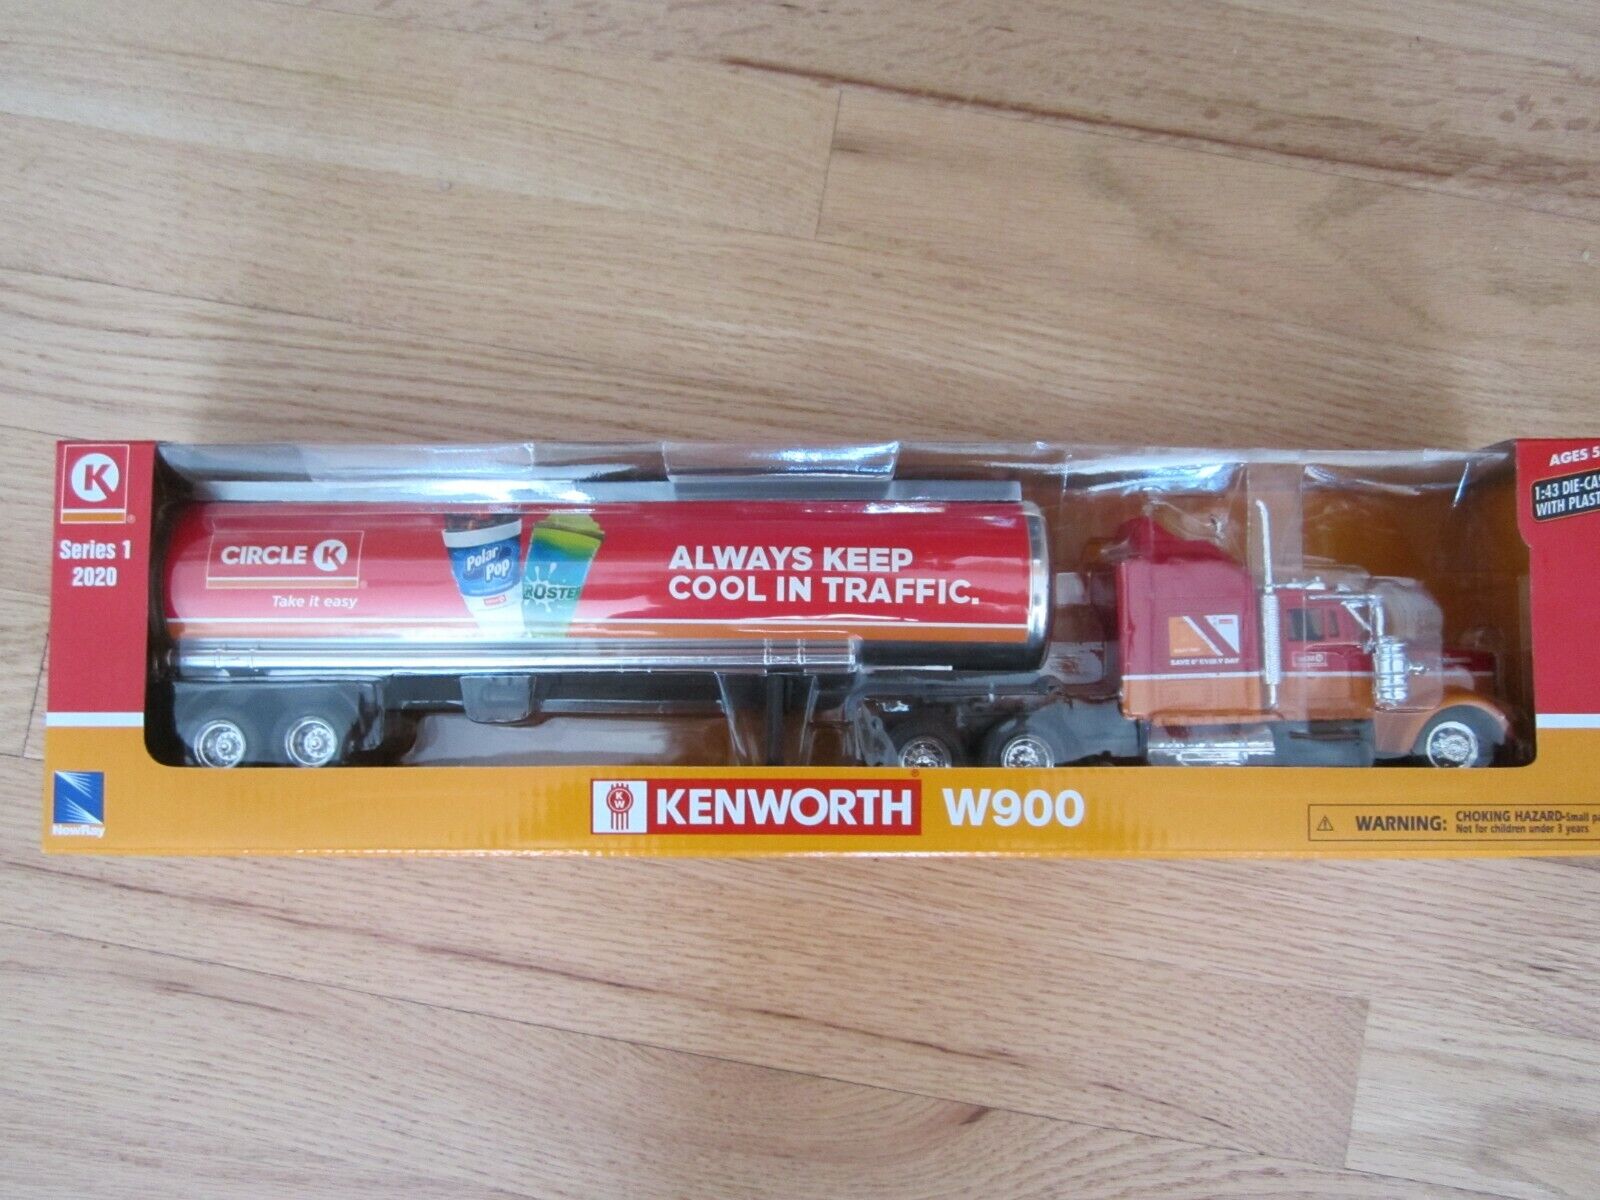 NEW 2020 Circle K Toy Tanker Truck Kenworth W900 1//43 Scale Series 1 New Ray